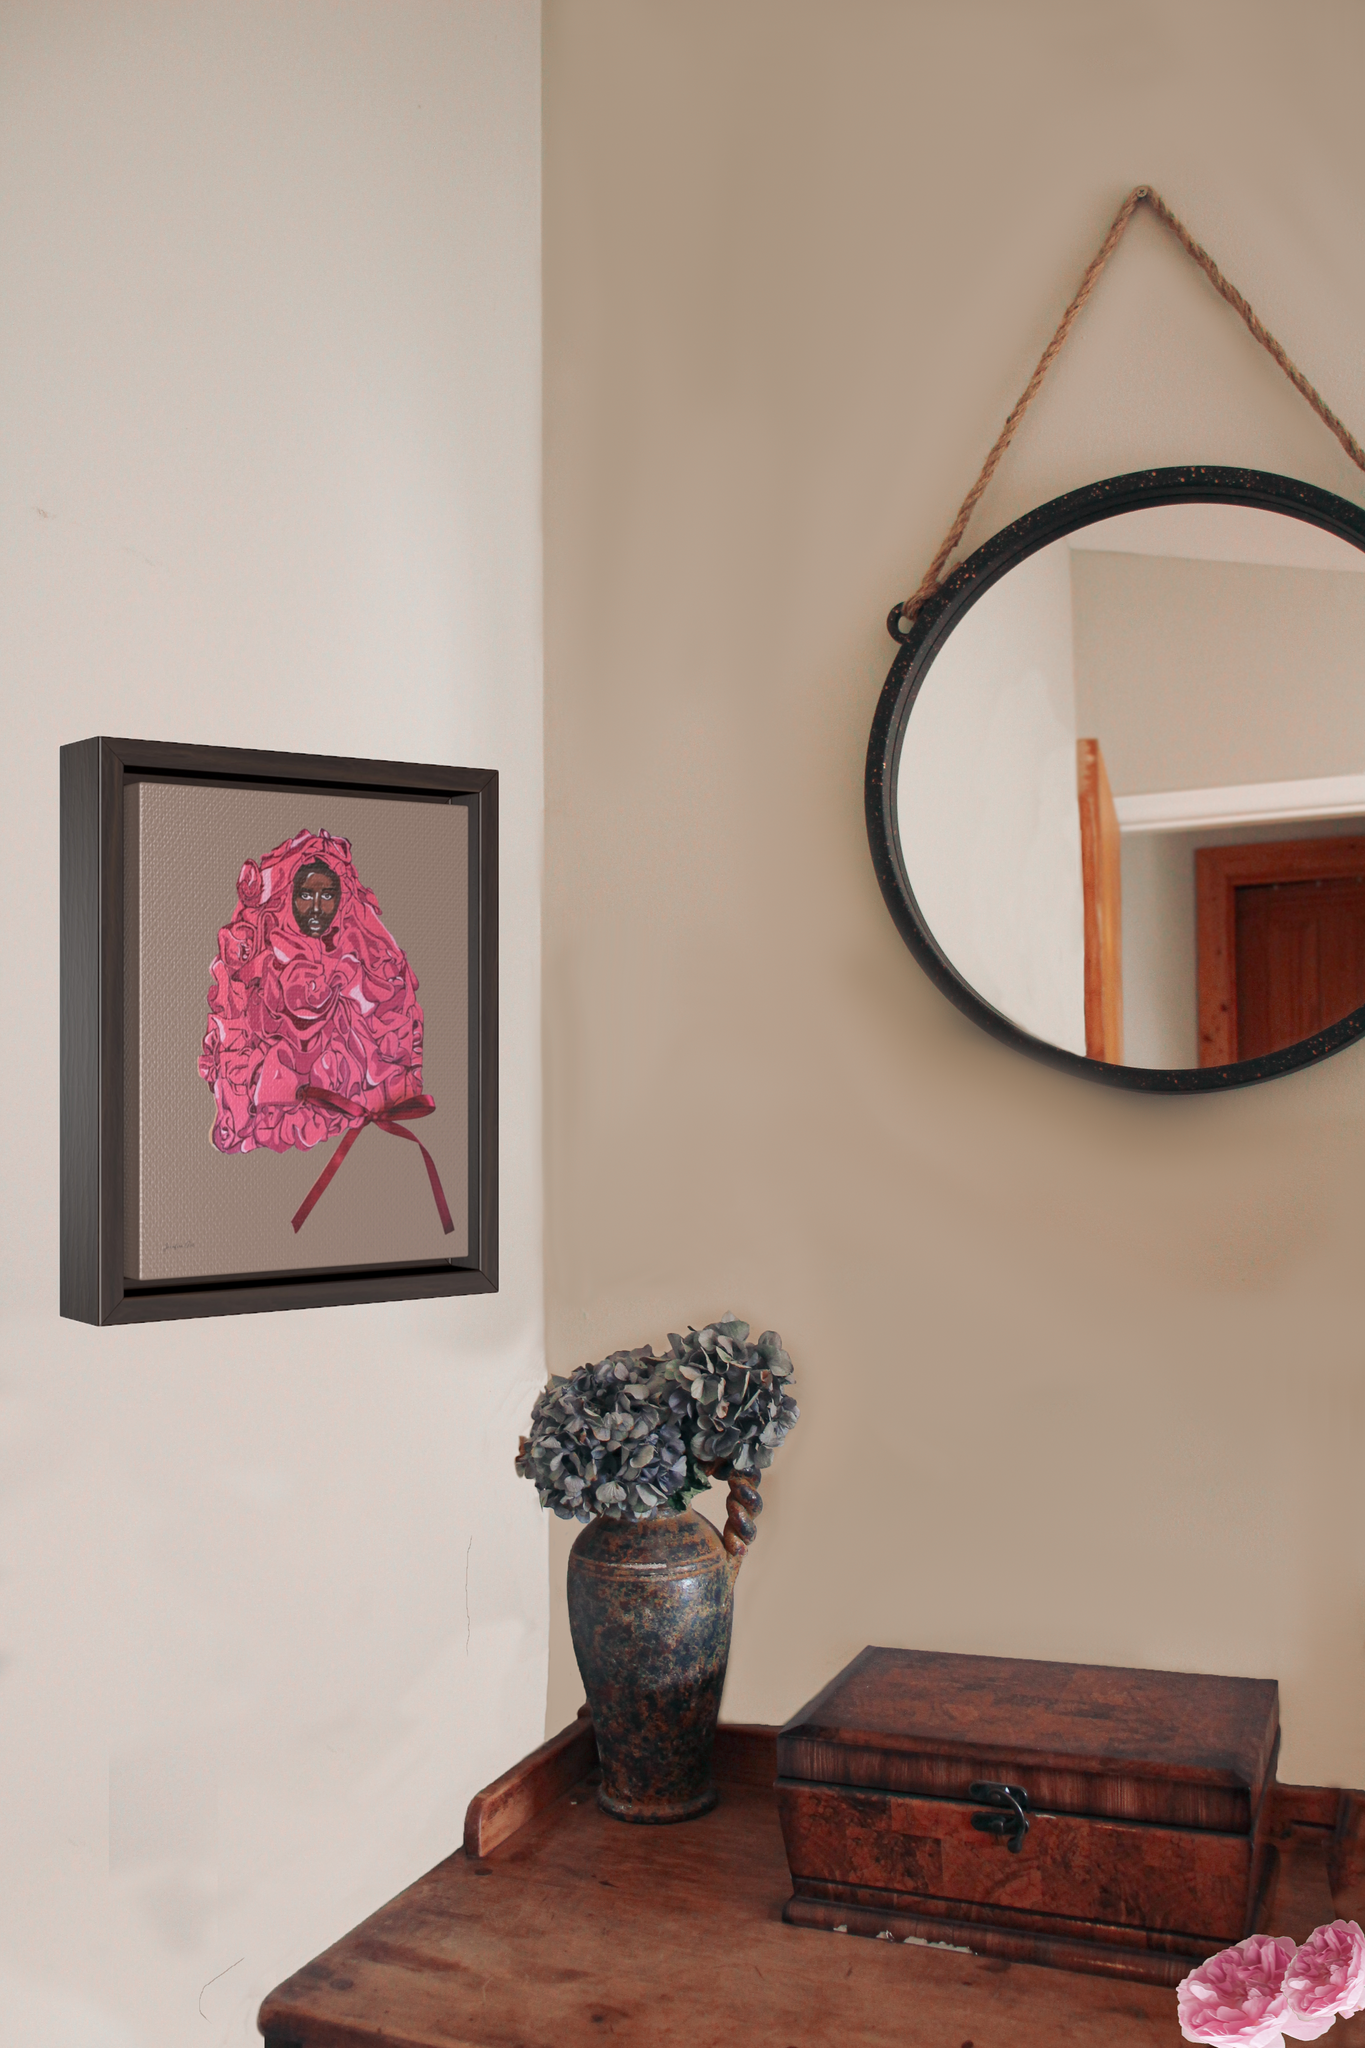 A framed gallery wrap canvas, with an illustration of model Adut Akech wearing a pink Valentino gown with a bow, with a nude background color, hanging on a wall next to a desk with a vase of flowers and a jewelry box